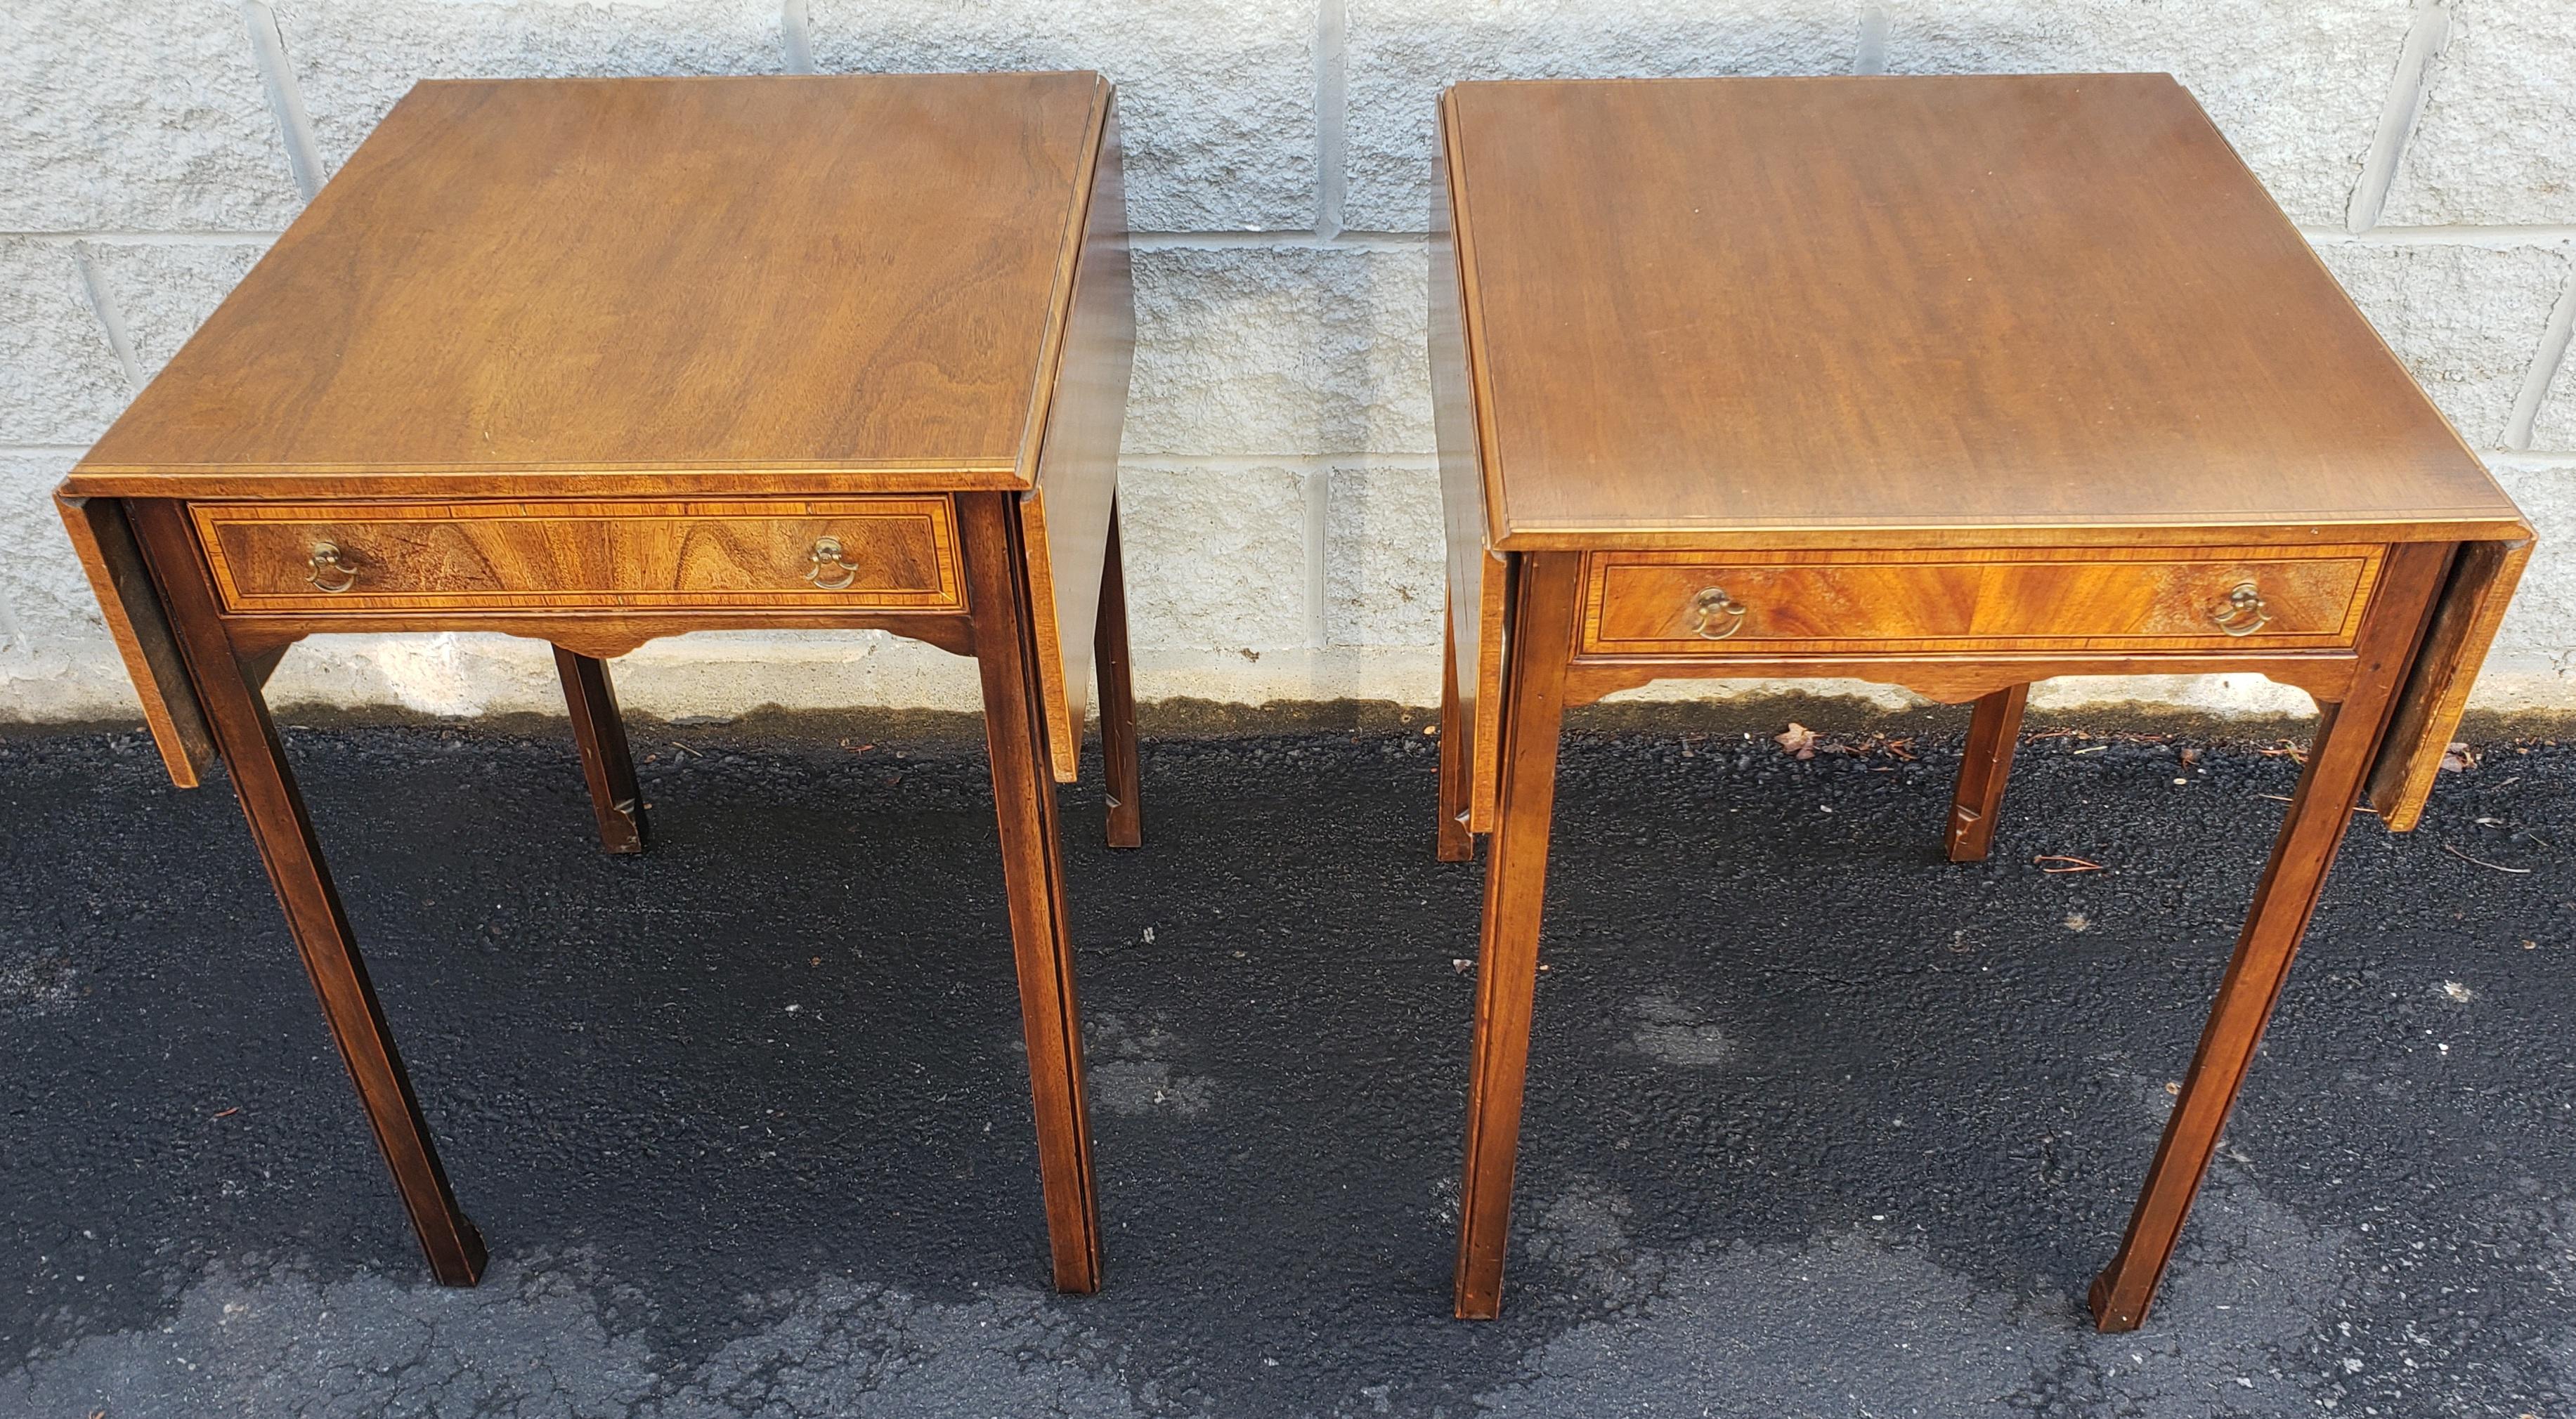 Pair of 1930s George III Cross-Banded Mahogany Inlay Pembroke Tables In Good Condition For Sale In Germantown, MD